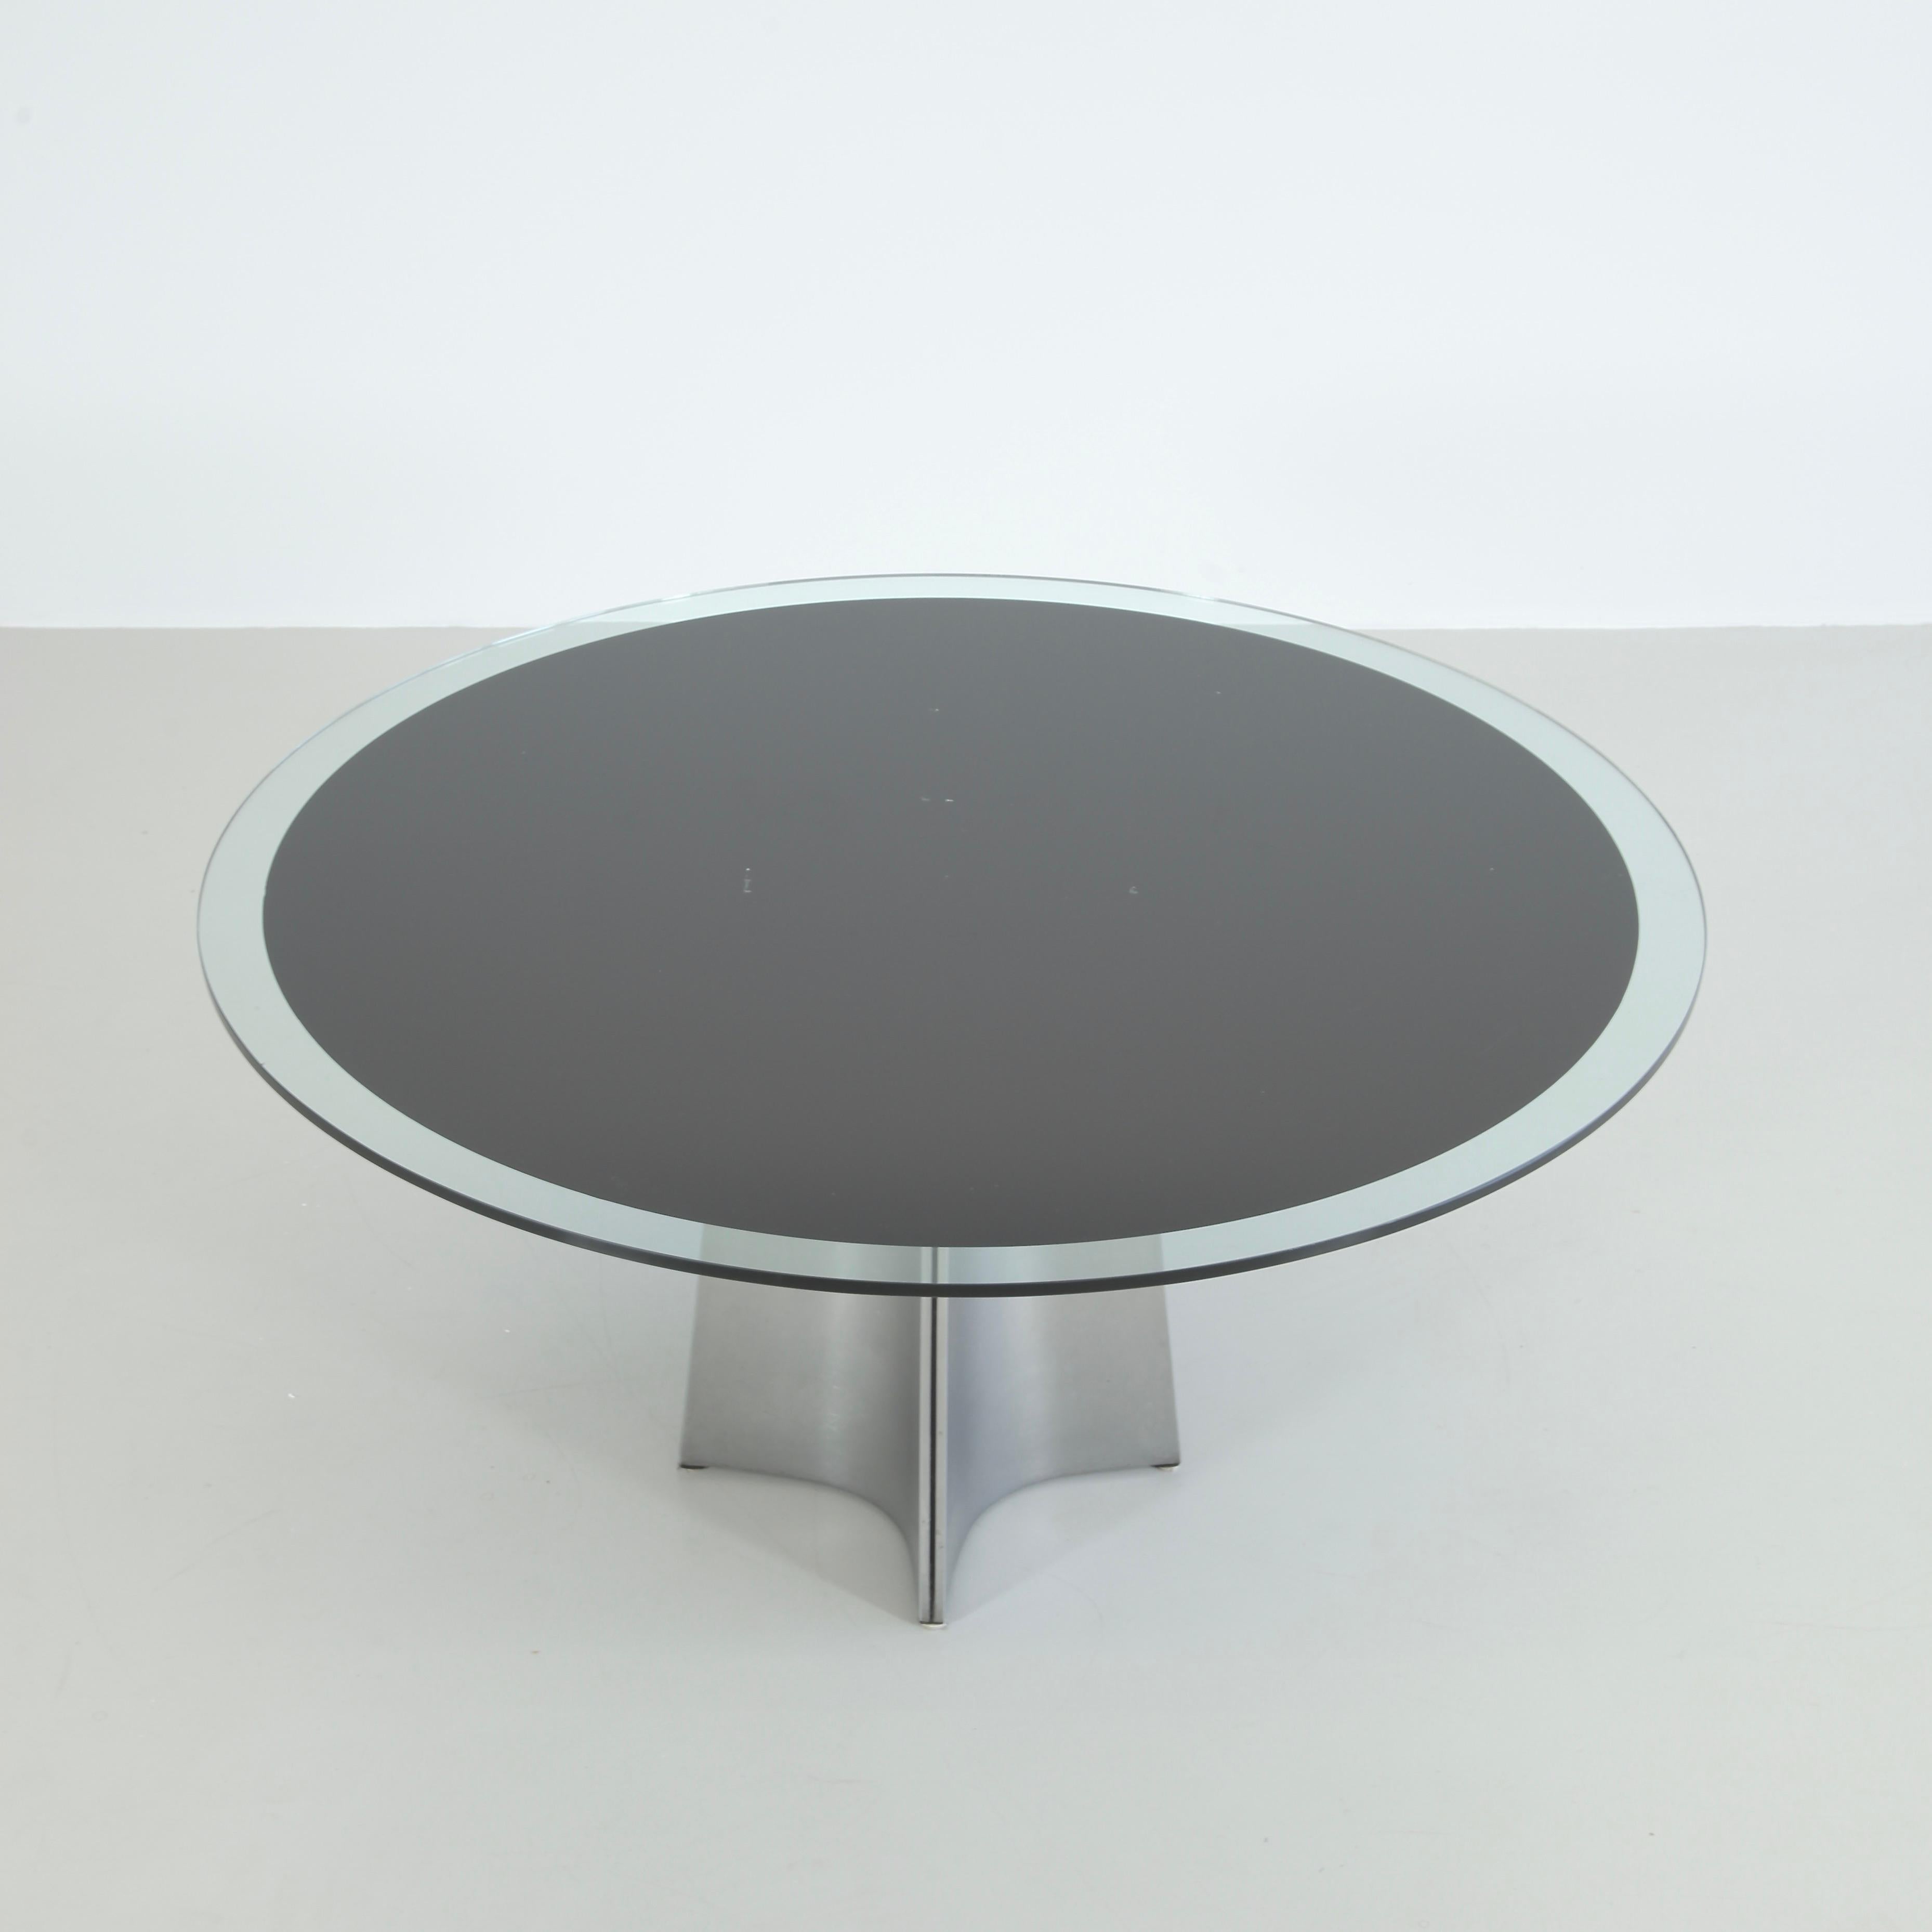 Round pedestal dining table designed by Luigi Saccardo. Italy, ARRMET, circa 1973.

Brushed aluminum base and the original round glass top with black center underlay. The curved metal producing a star-base. An iconic piece by the Italian Modernist